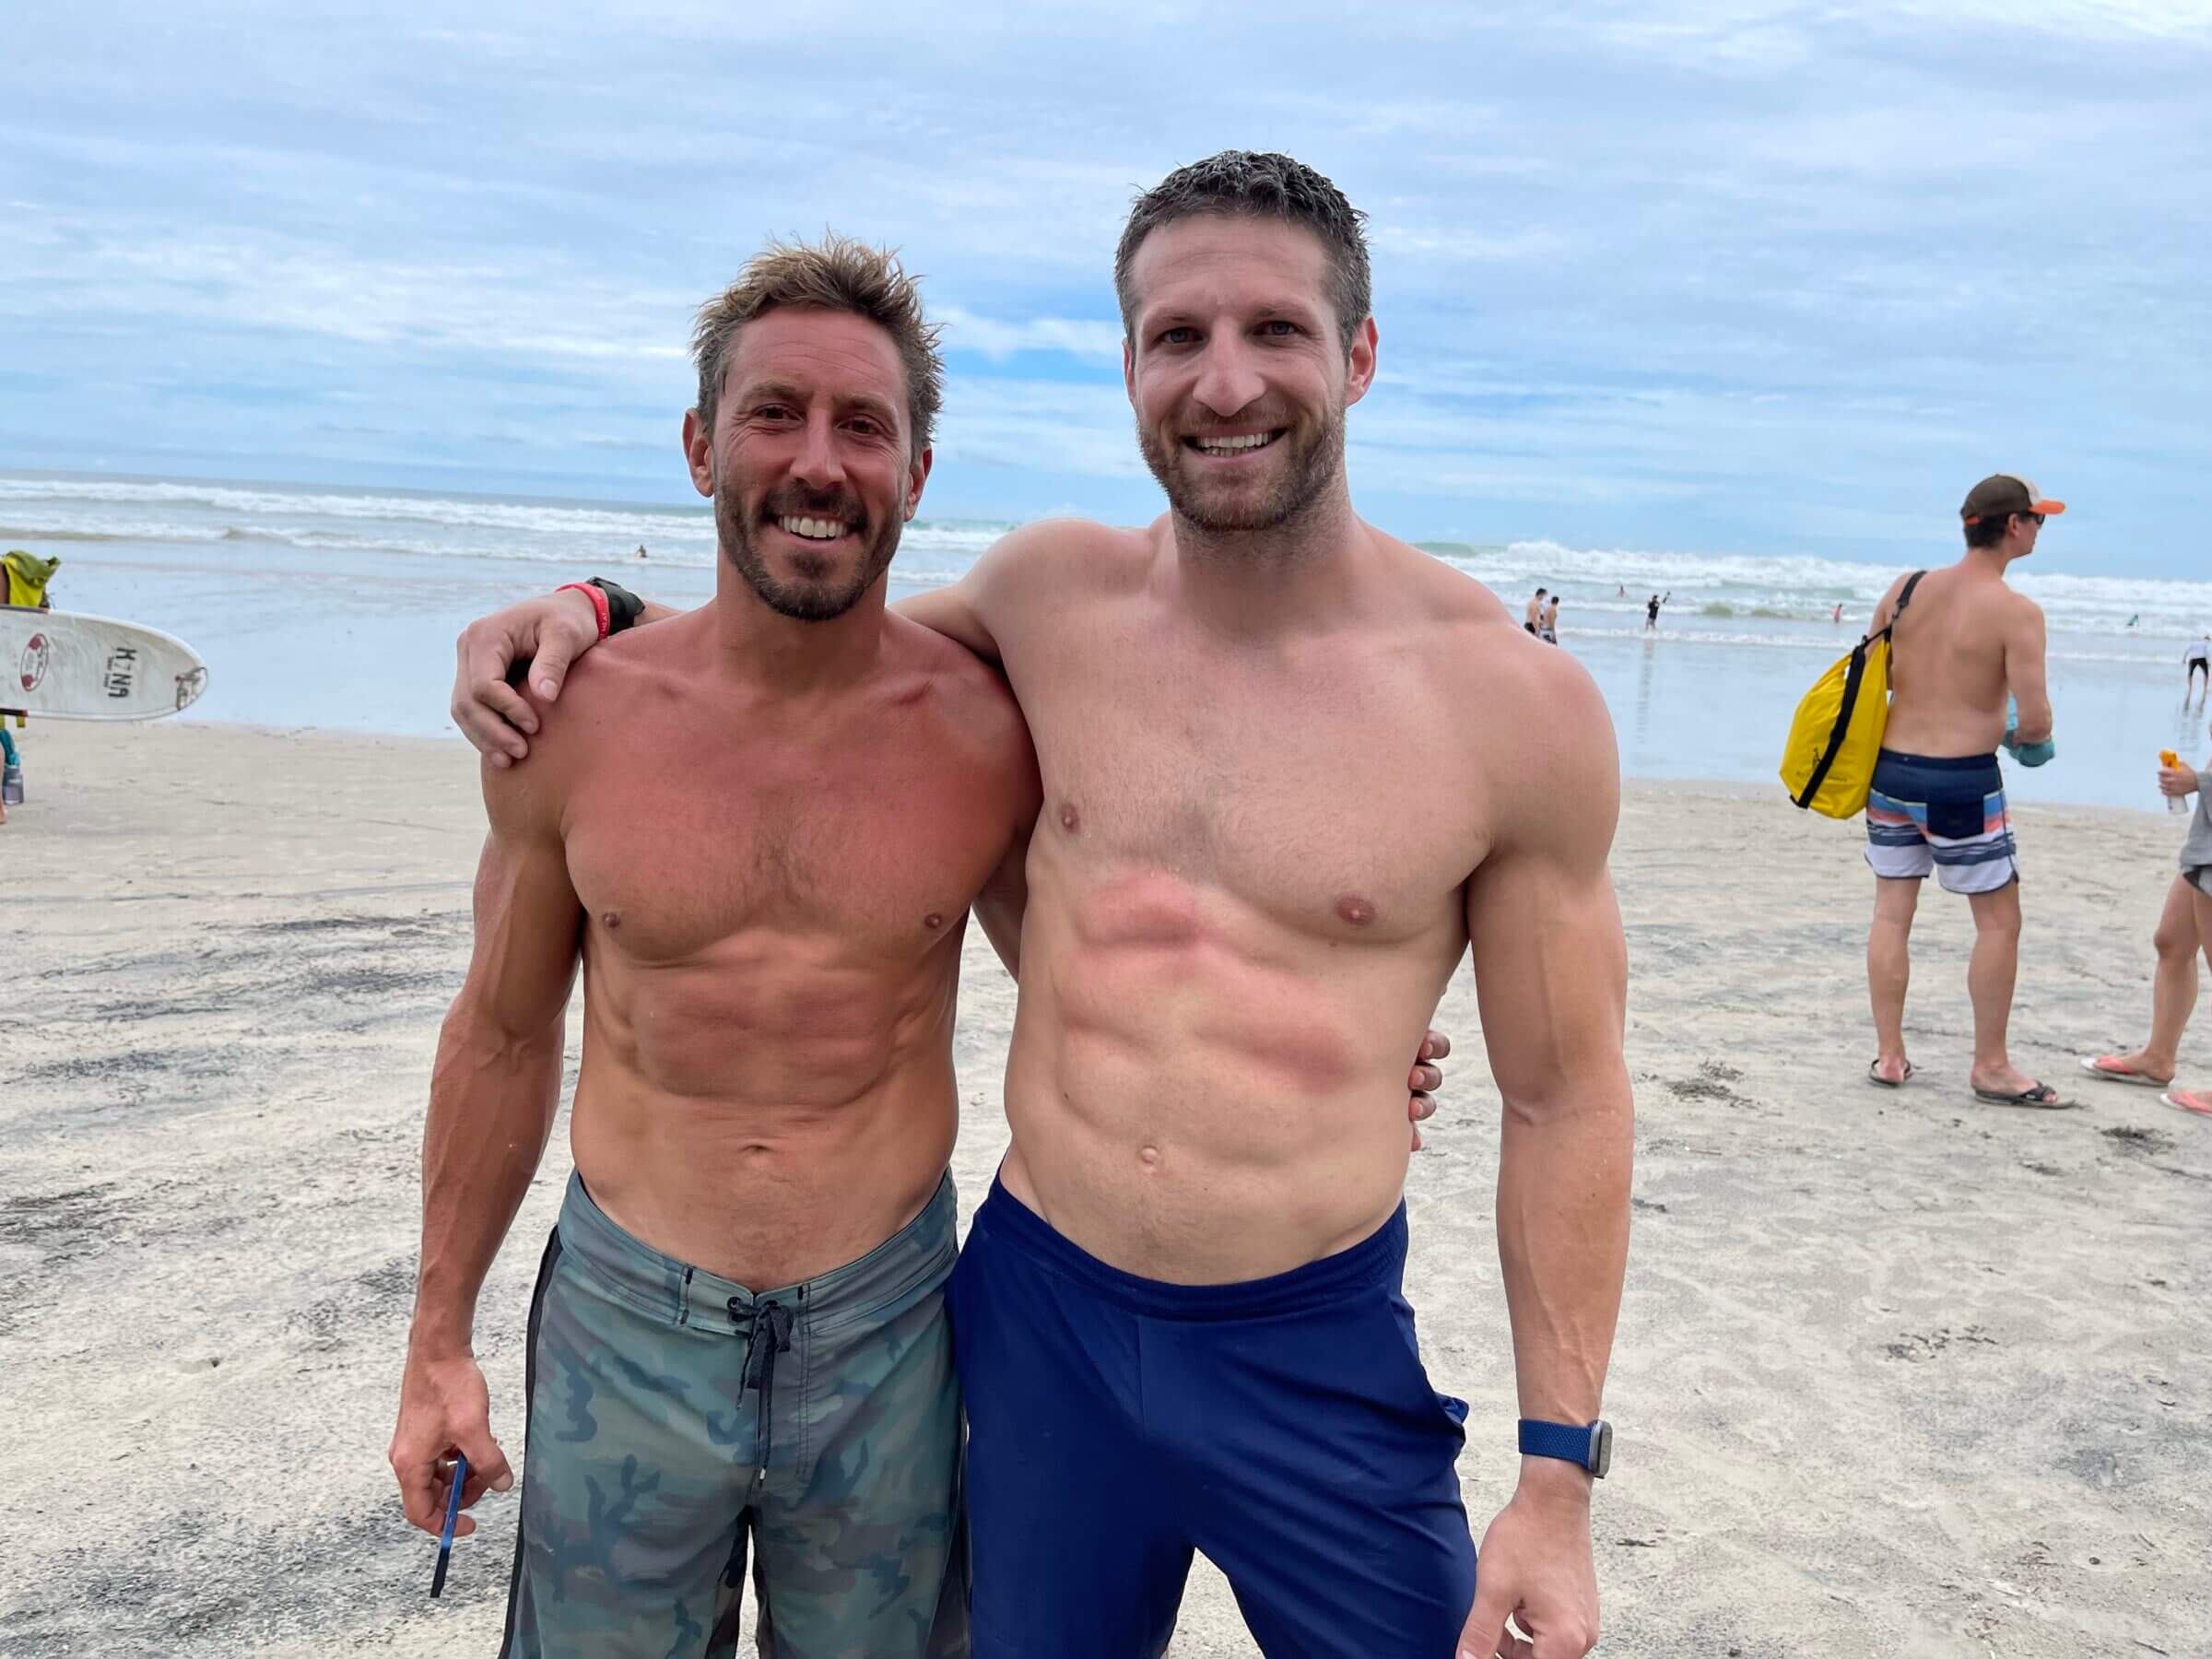 I fully embraced an animal-based diet after having met Paul Saladino in Costa Rica